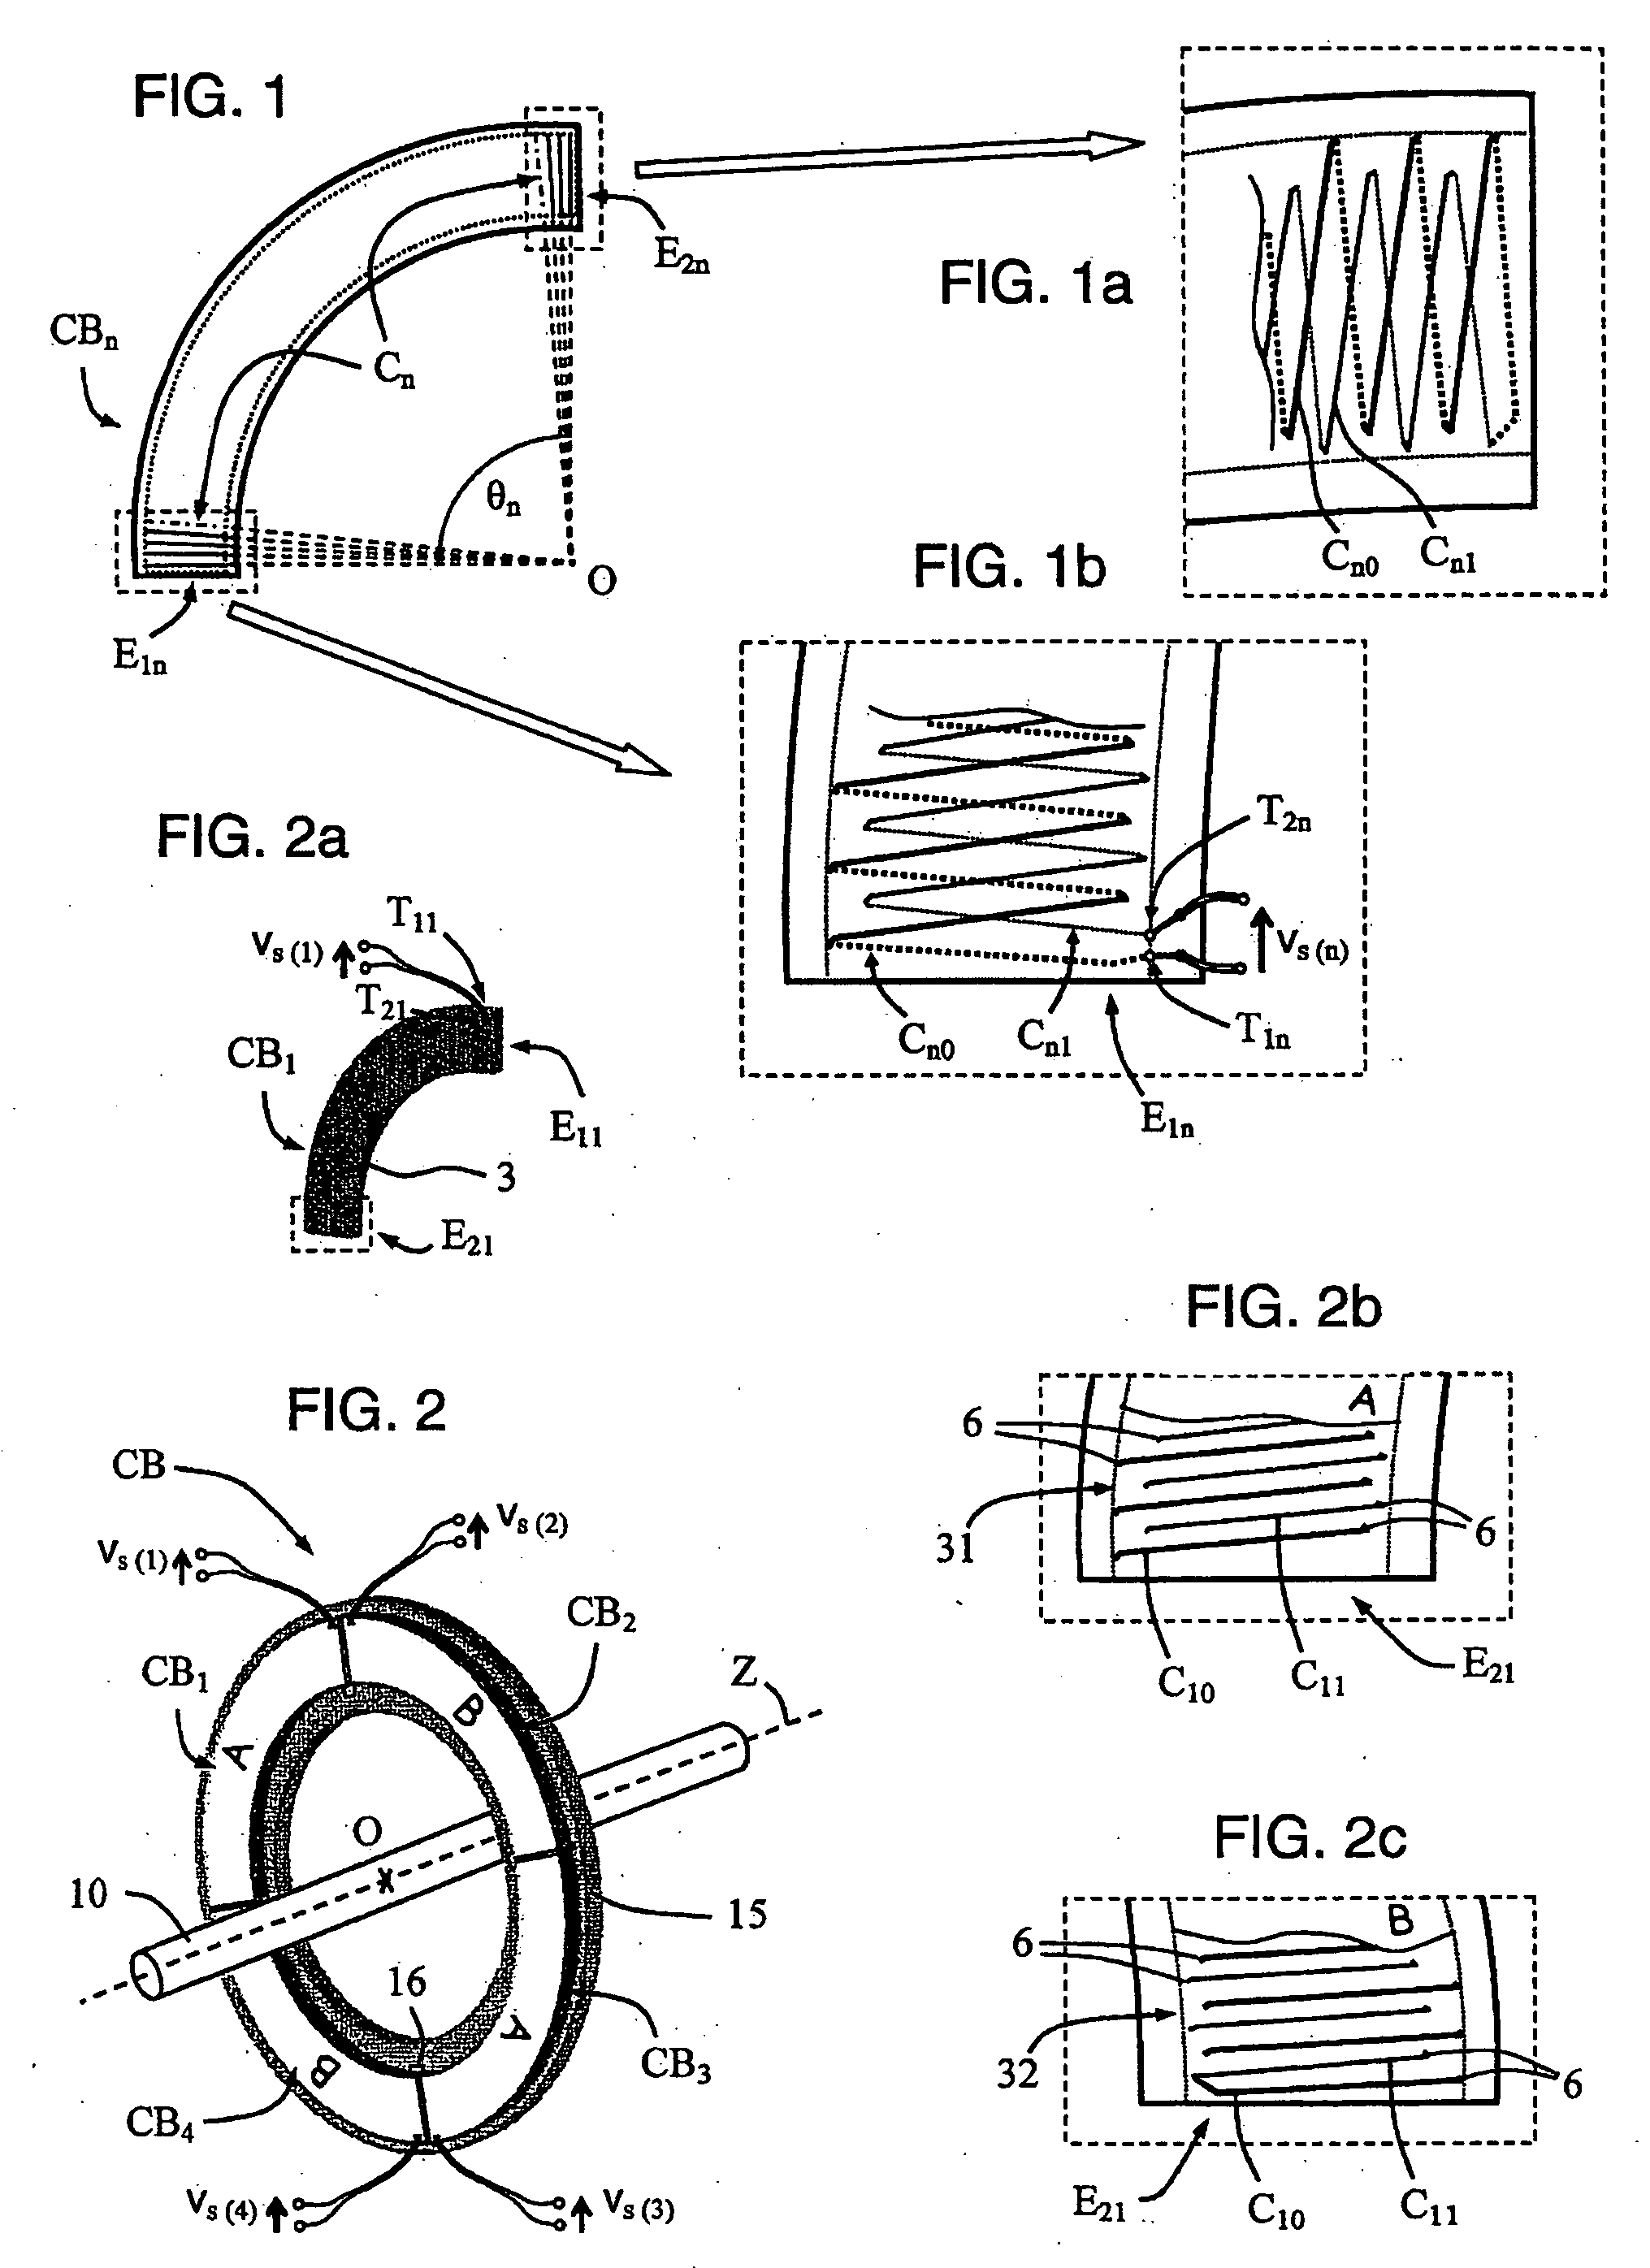 Current transformer with rogowski type windings, comprising an association of partial circuits forming a complete circuit